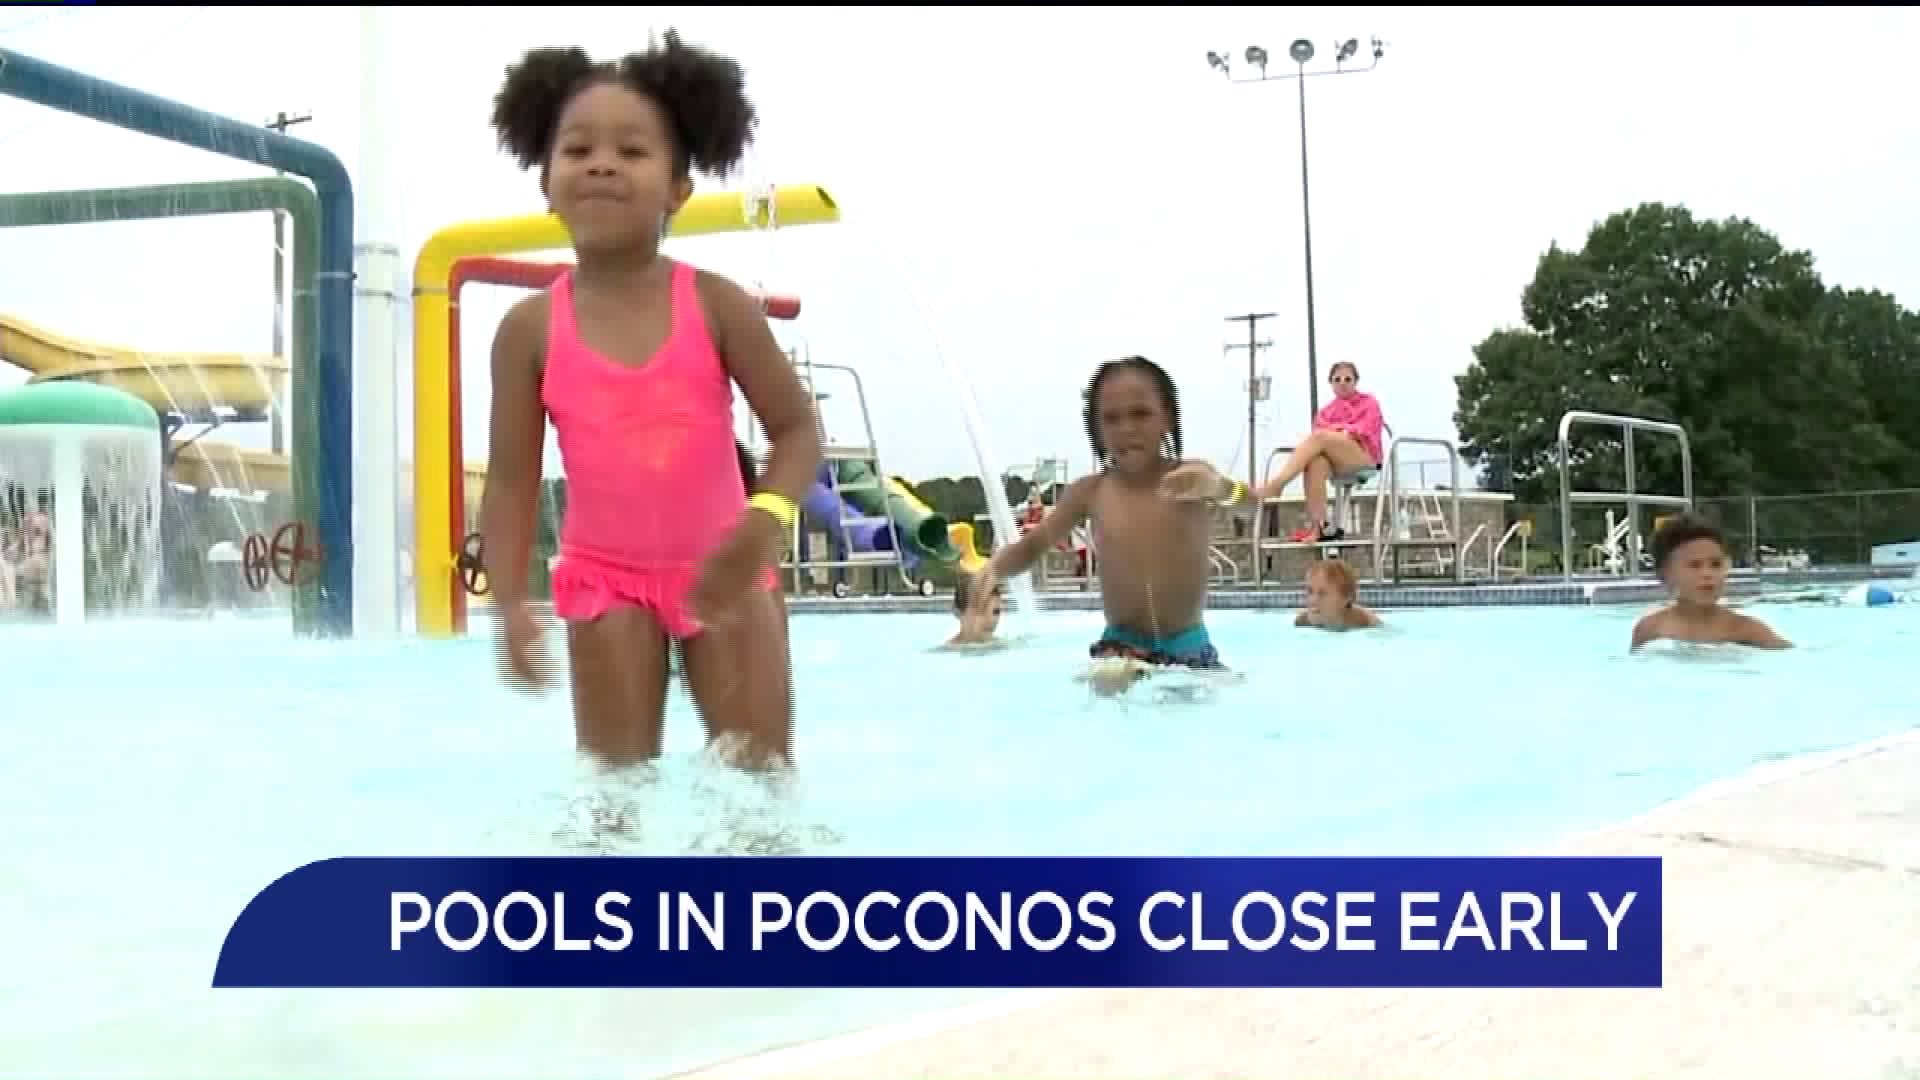 Pools Closing Early in the Poconos